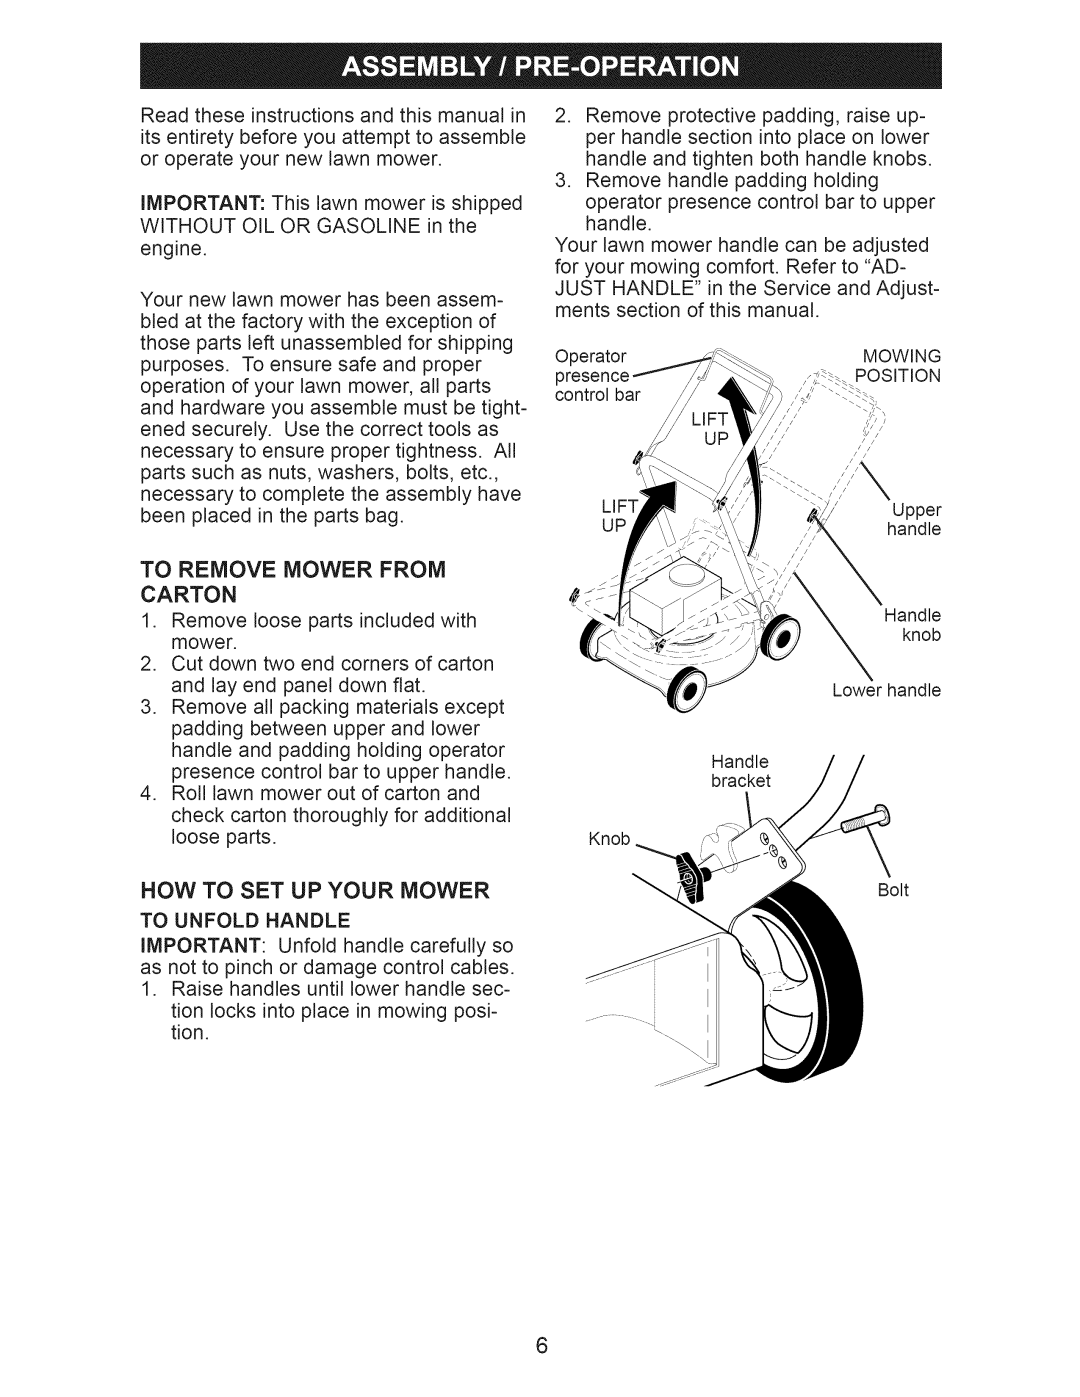 Craftsman 917.374361 owner manual Now To Set Up Your Mower, To Remove Mower From Carton 